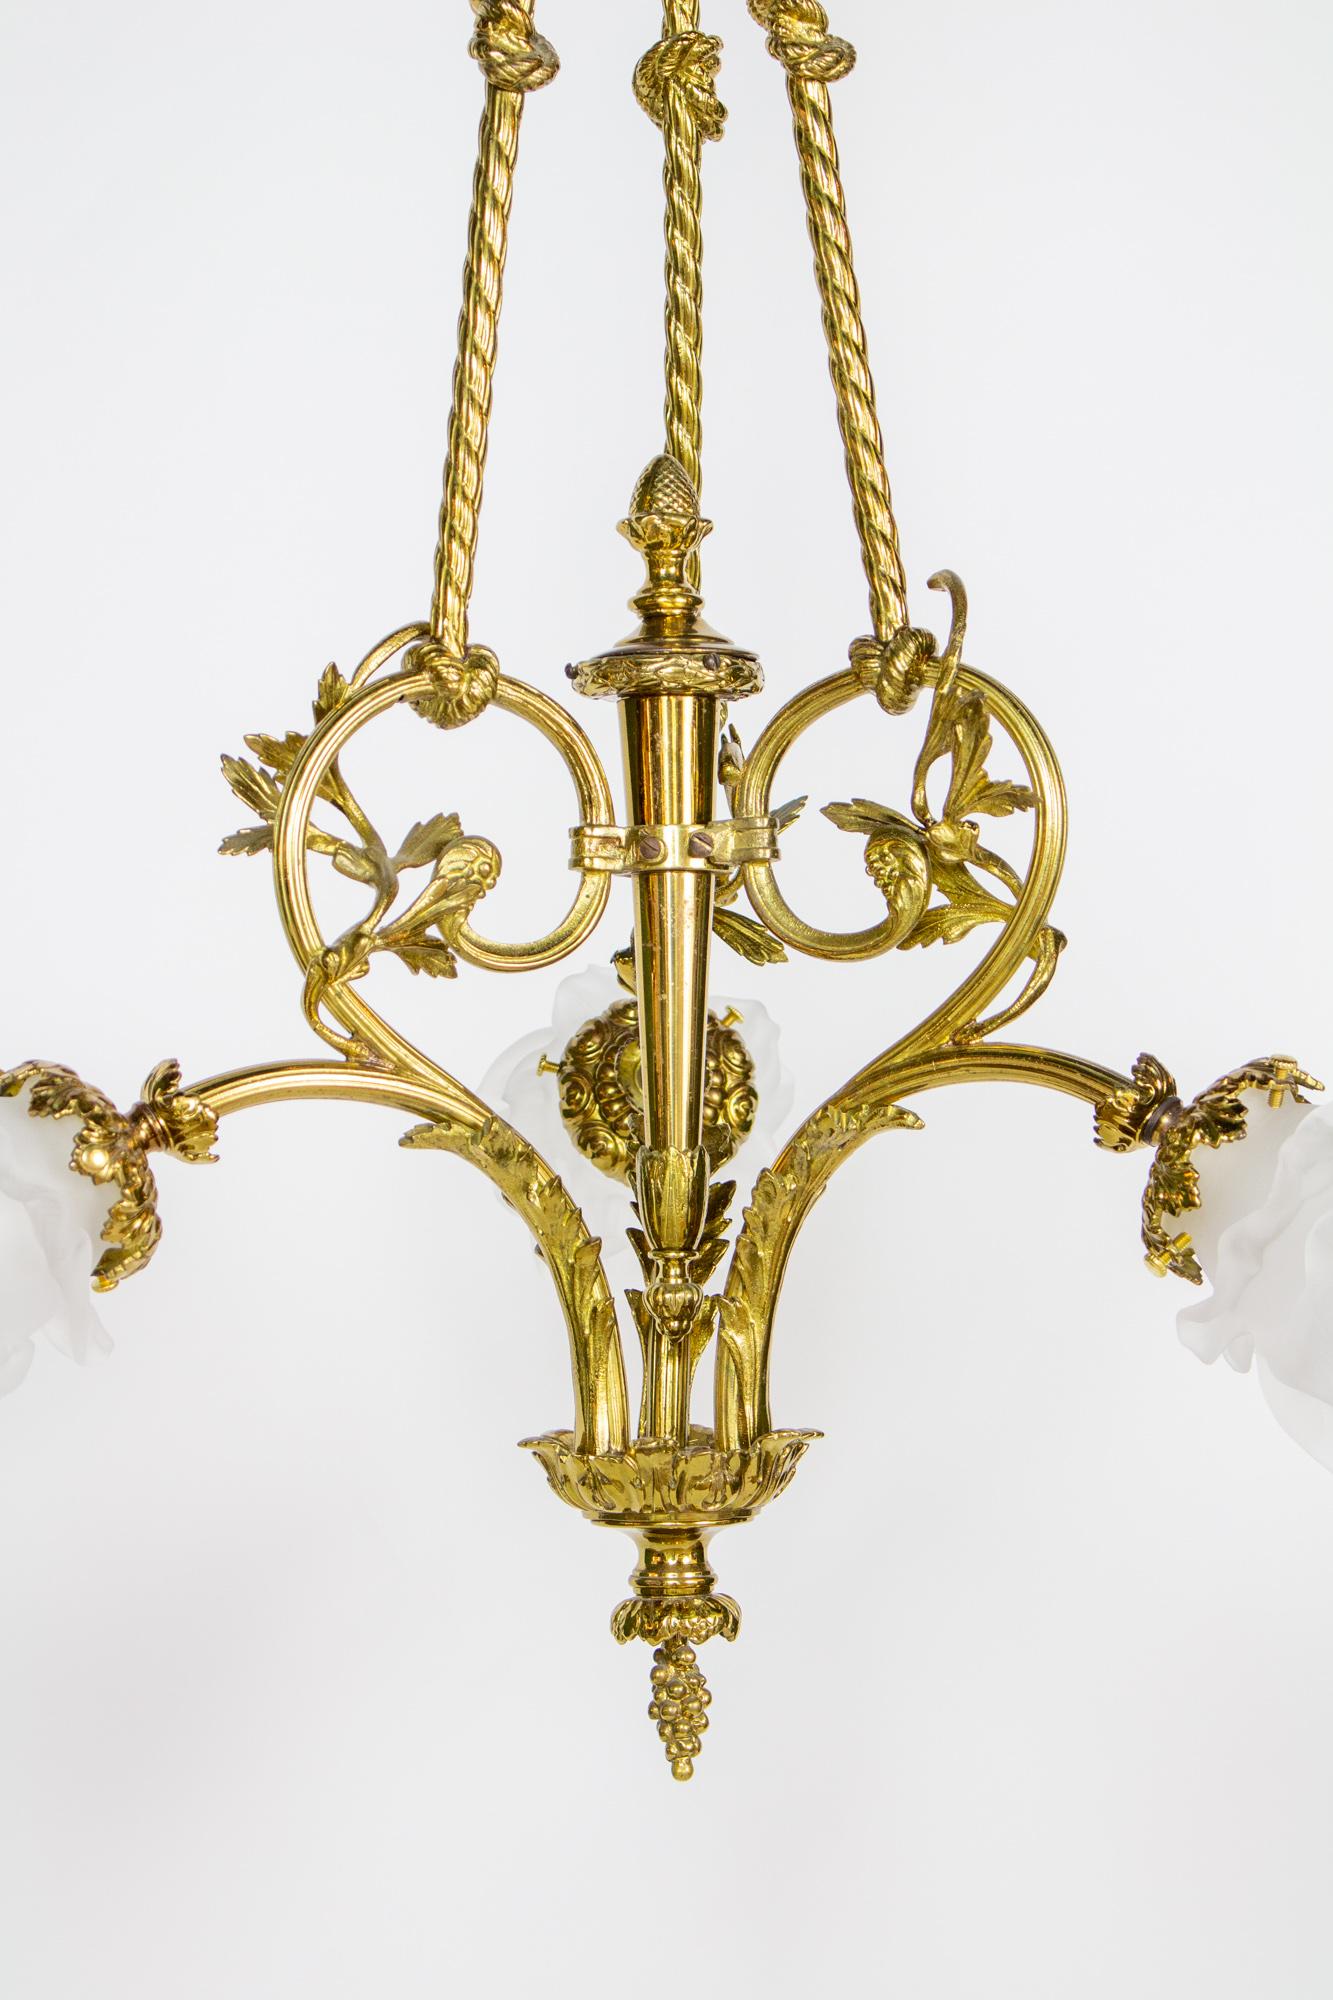 Brass chandelier in the shape of ropes and bows. Flower shaped glass shades. Louis XIV style. Completely restored and rewired, ready to install. includes glass flower petal shades in excellent condition.